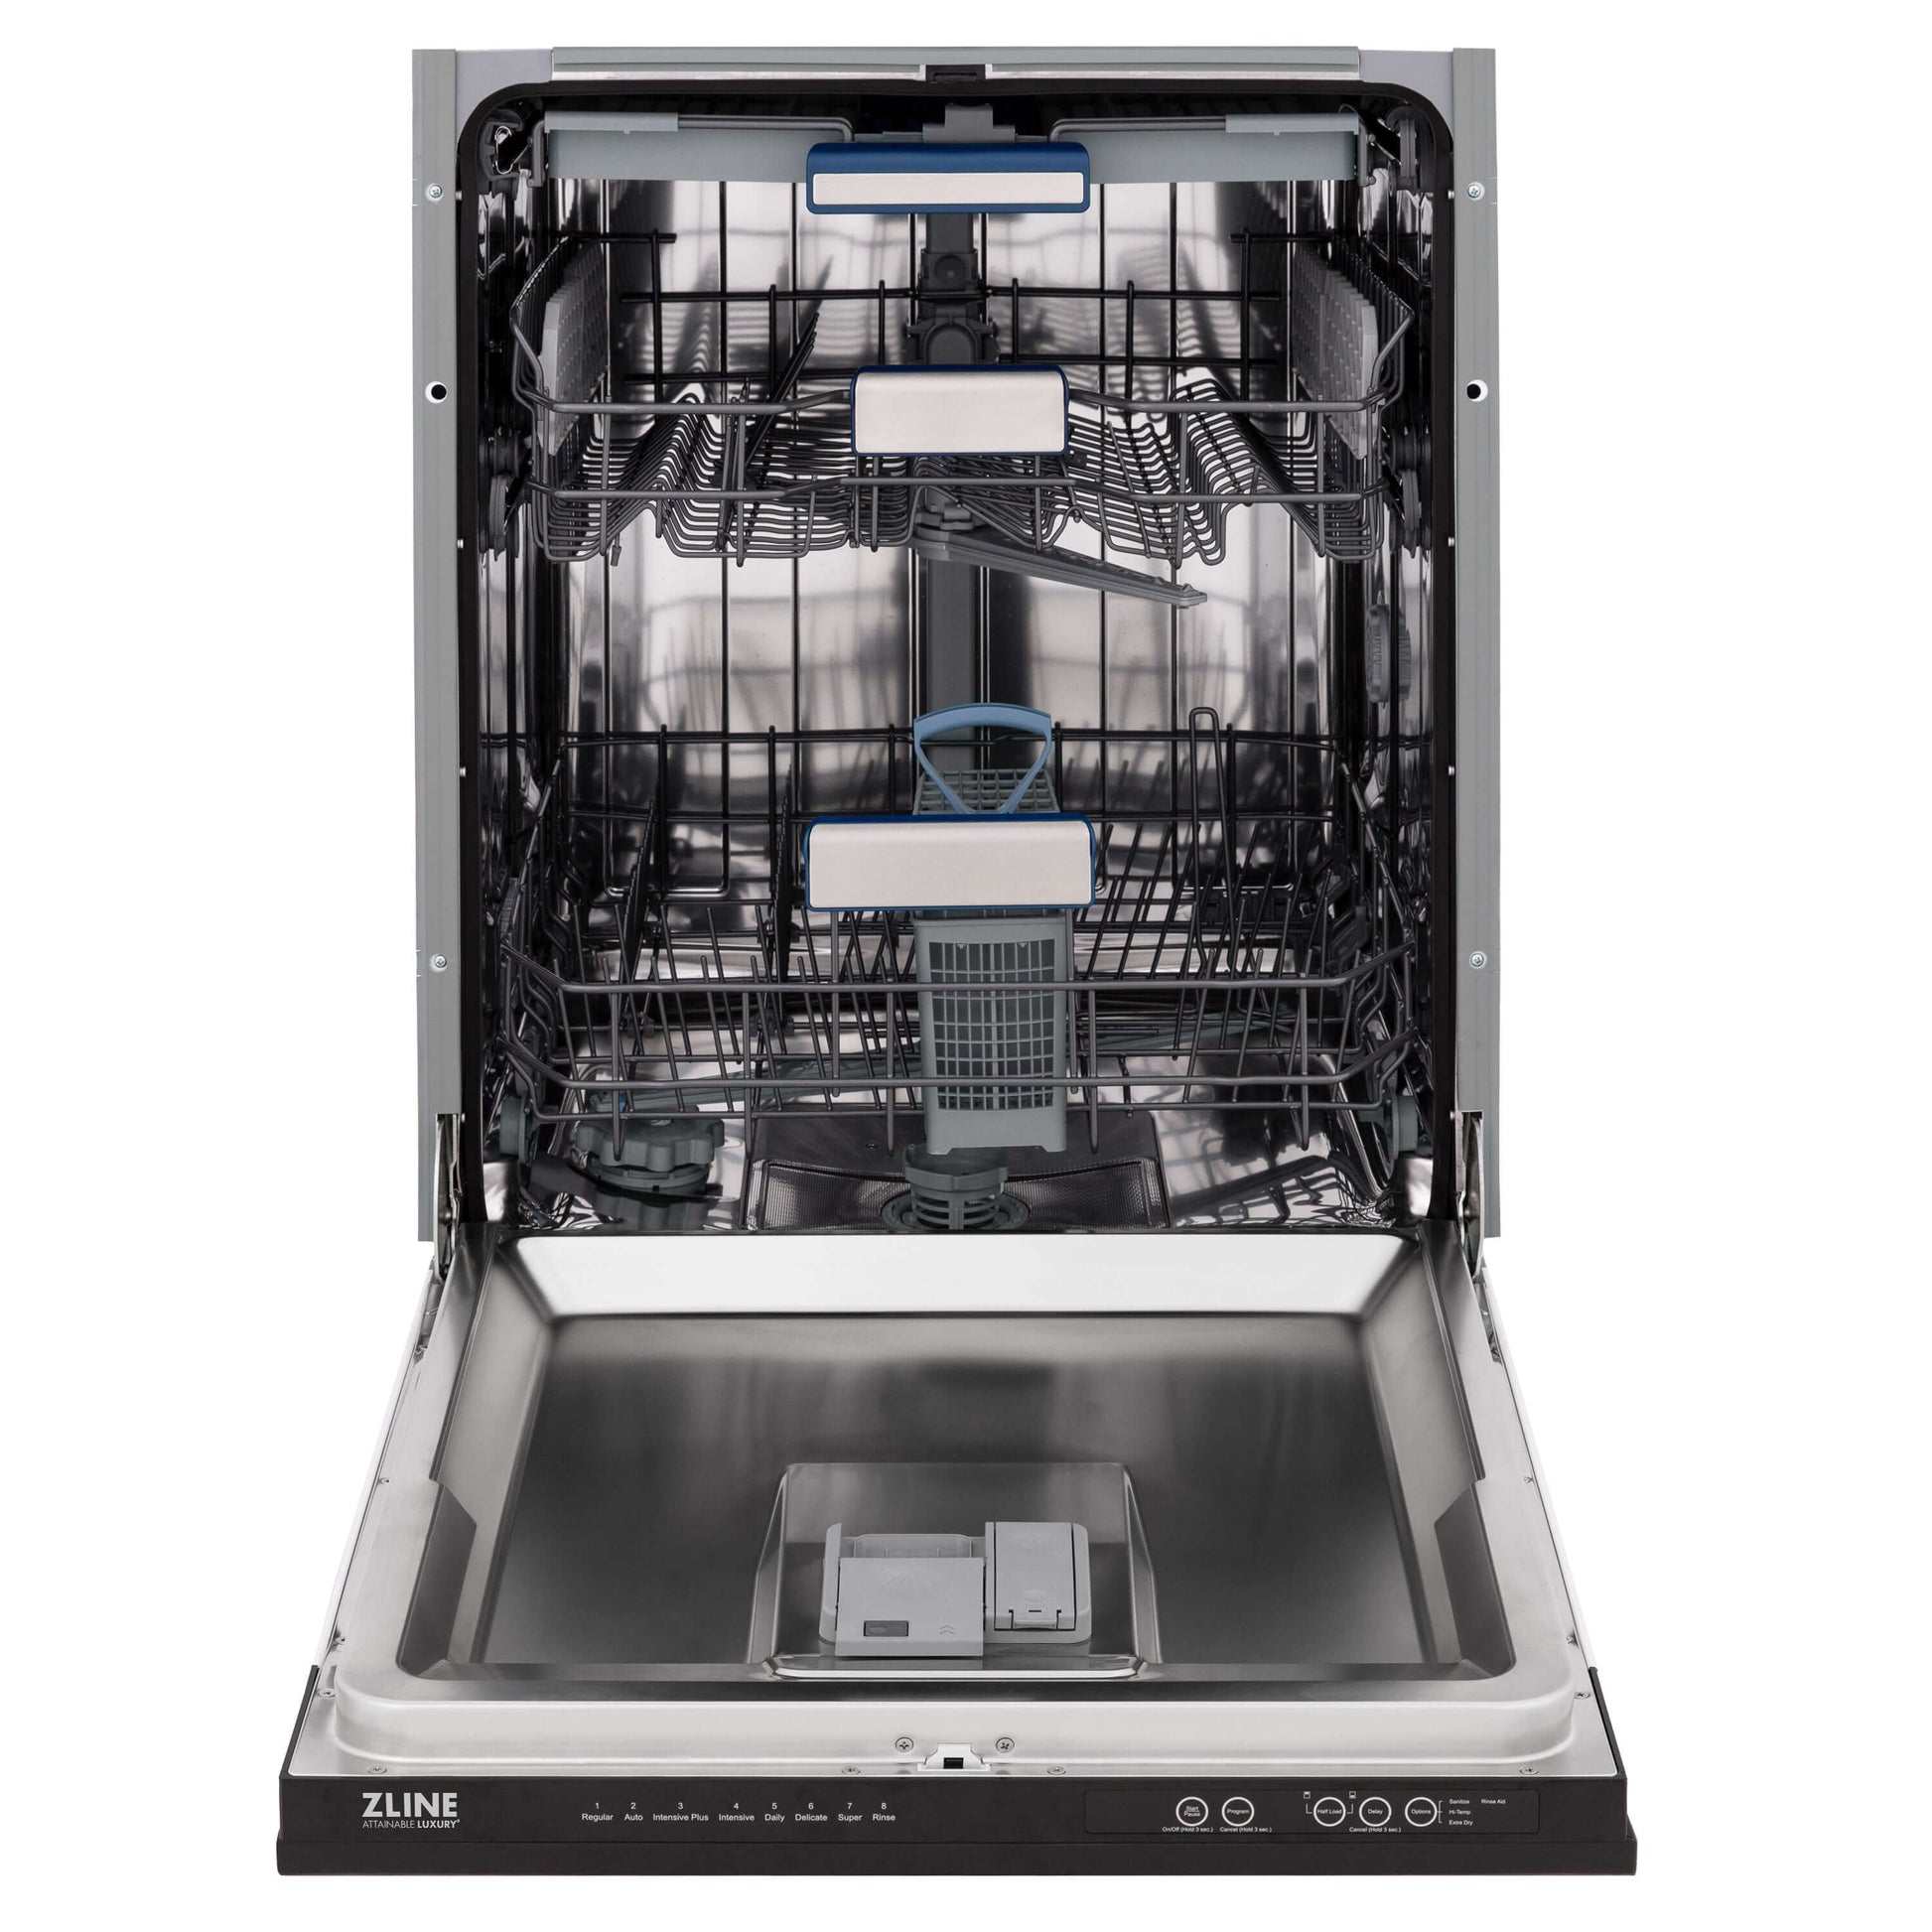 ZLINE 24" Tallac Series 3rd Rack Dishwasher - Stainless Steel Tub with Color Panel Options